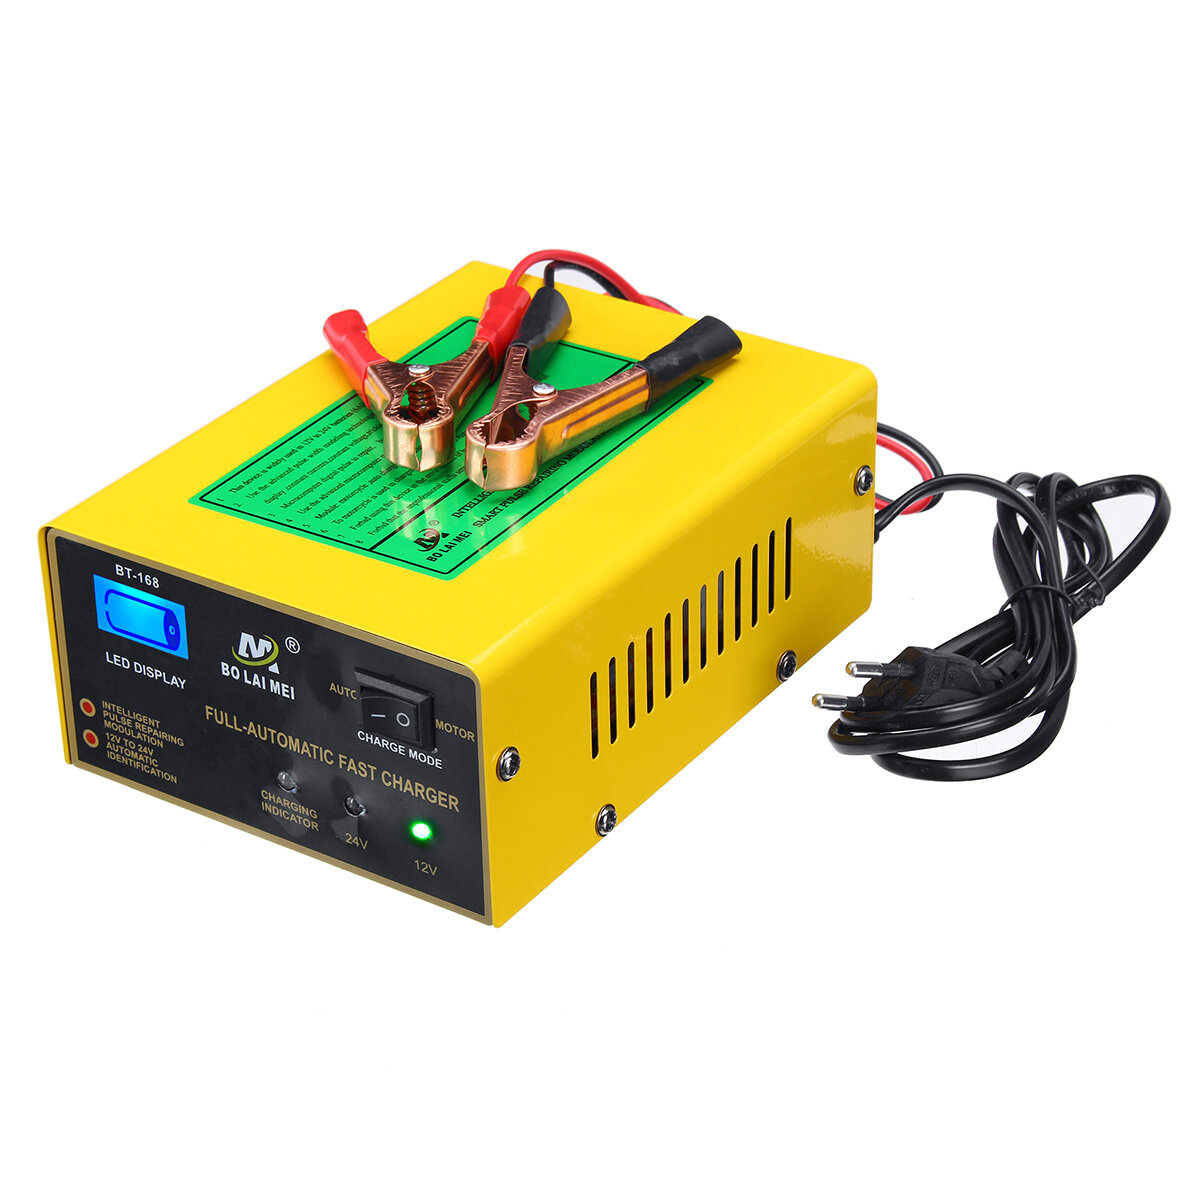 12V / 24V 15A Auto Lead Acid Battery Charger Intelligente Pulse Repair LCD voor auto motorfiets